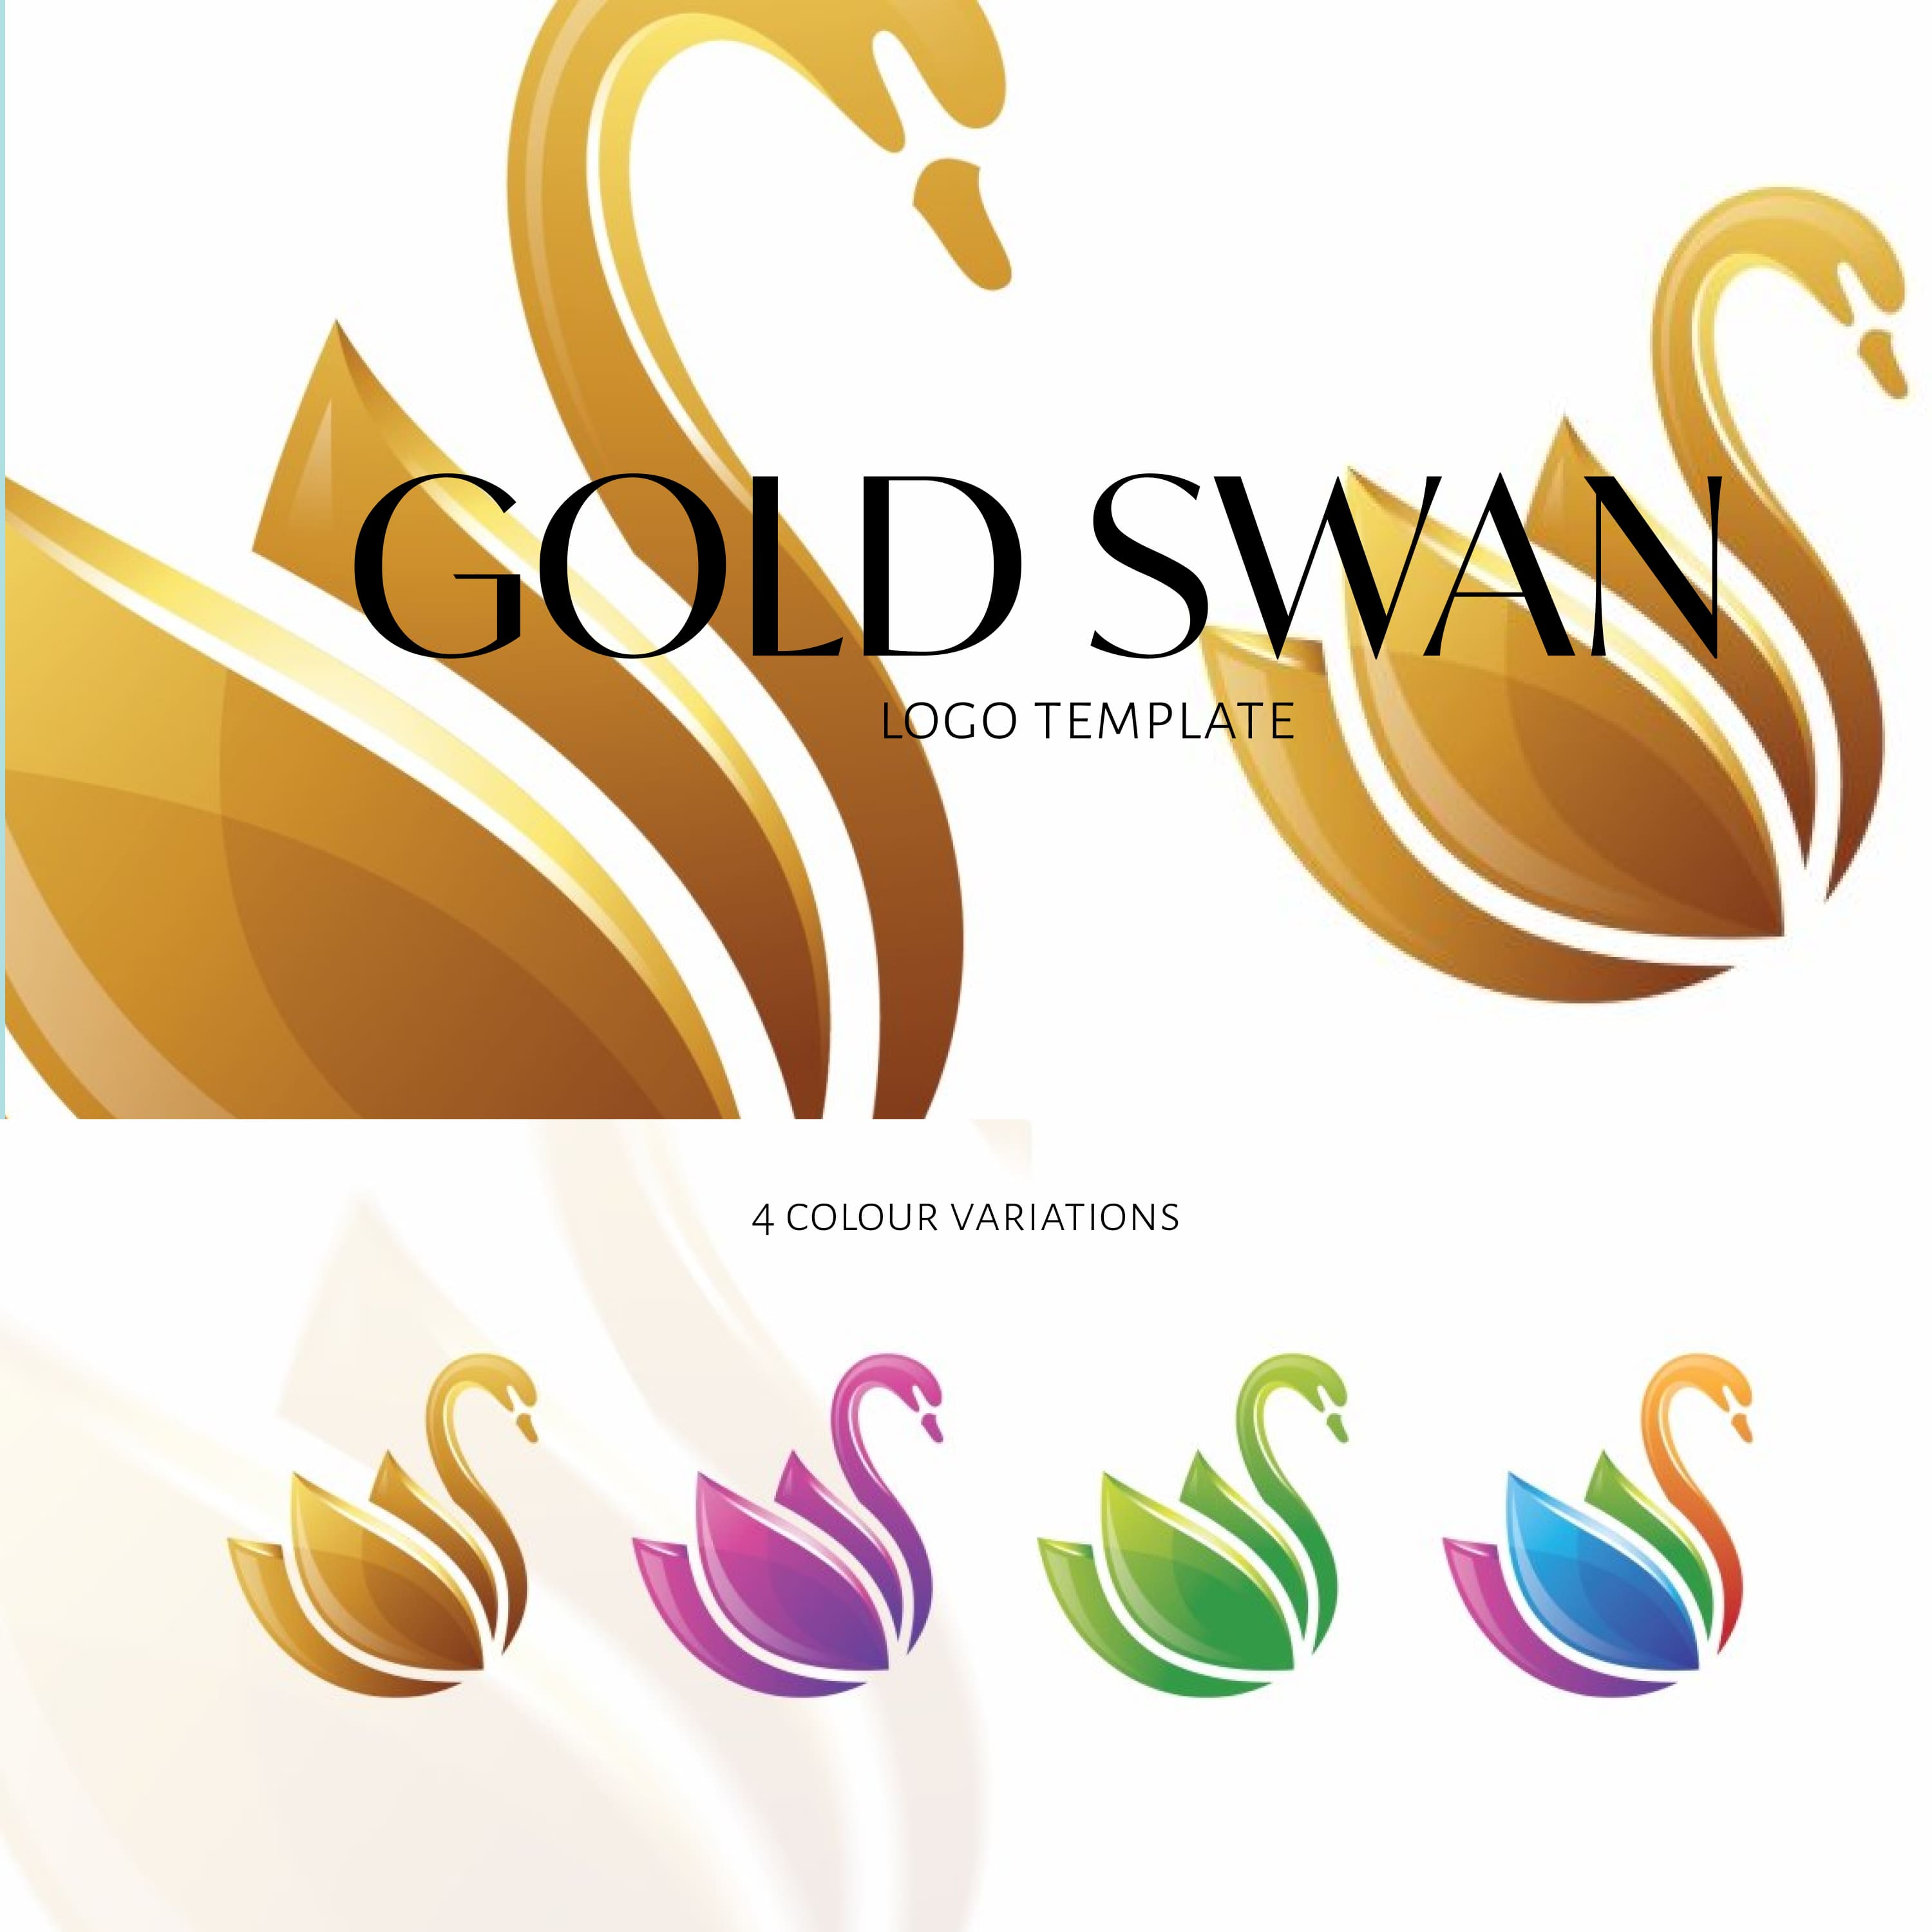 Gold Swan - Logo Template cover.